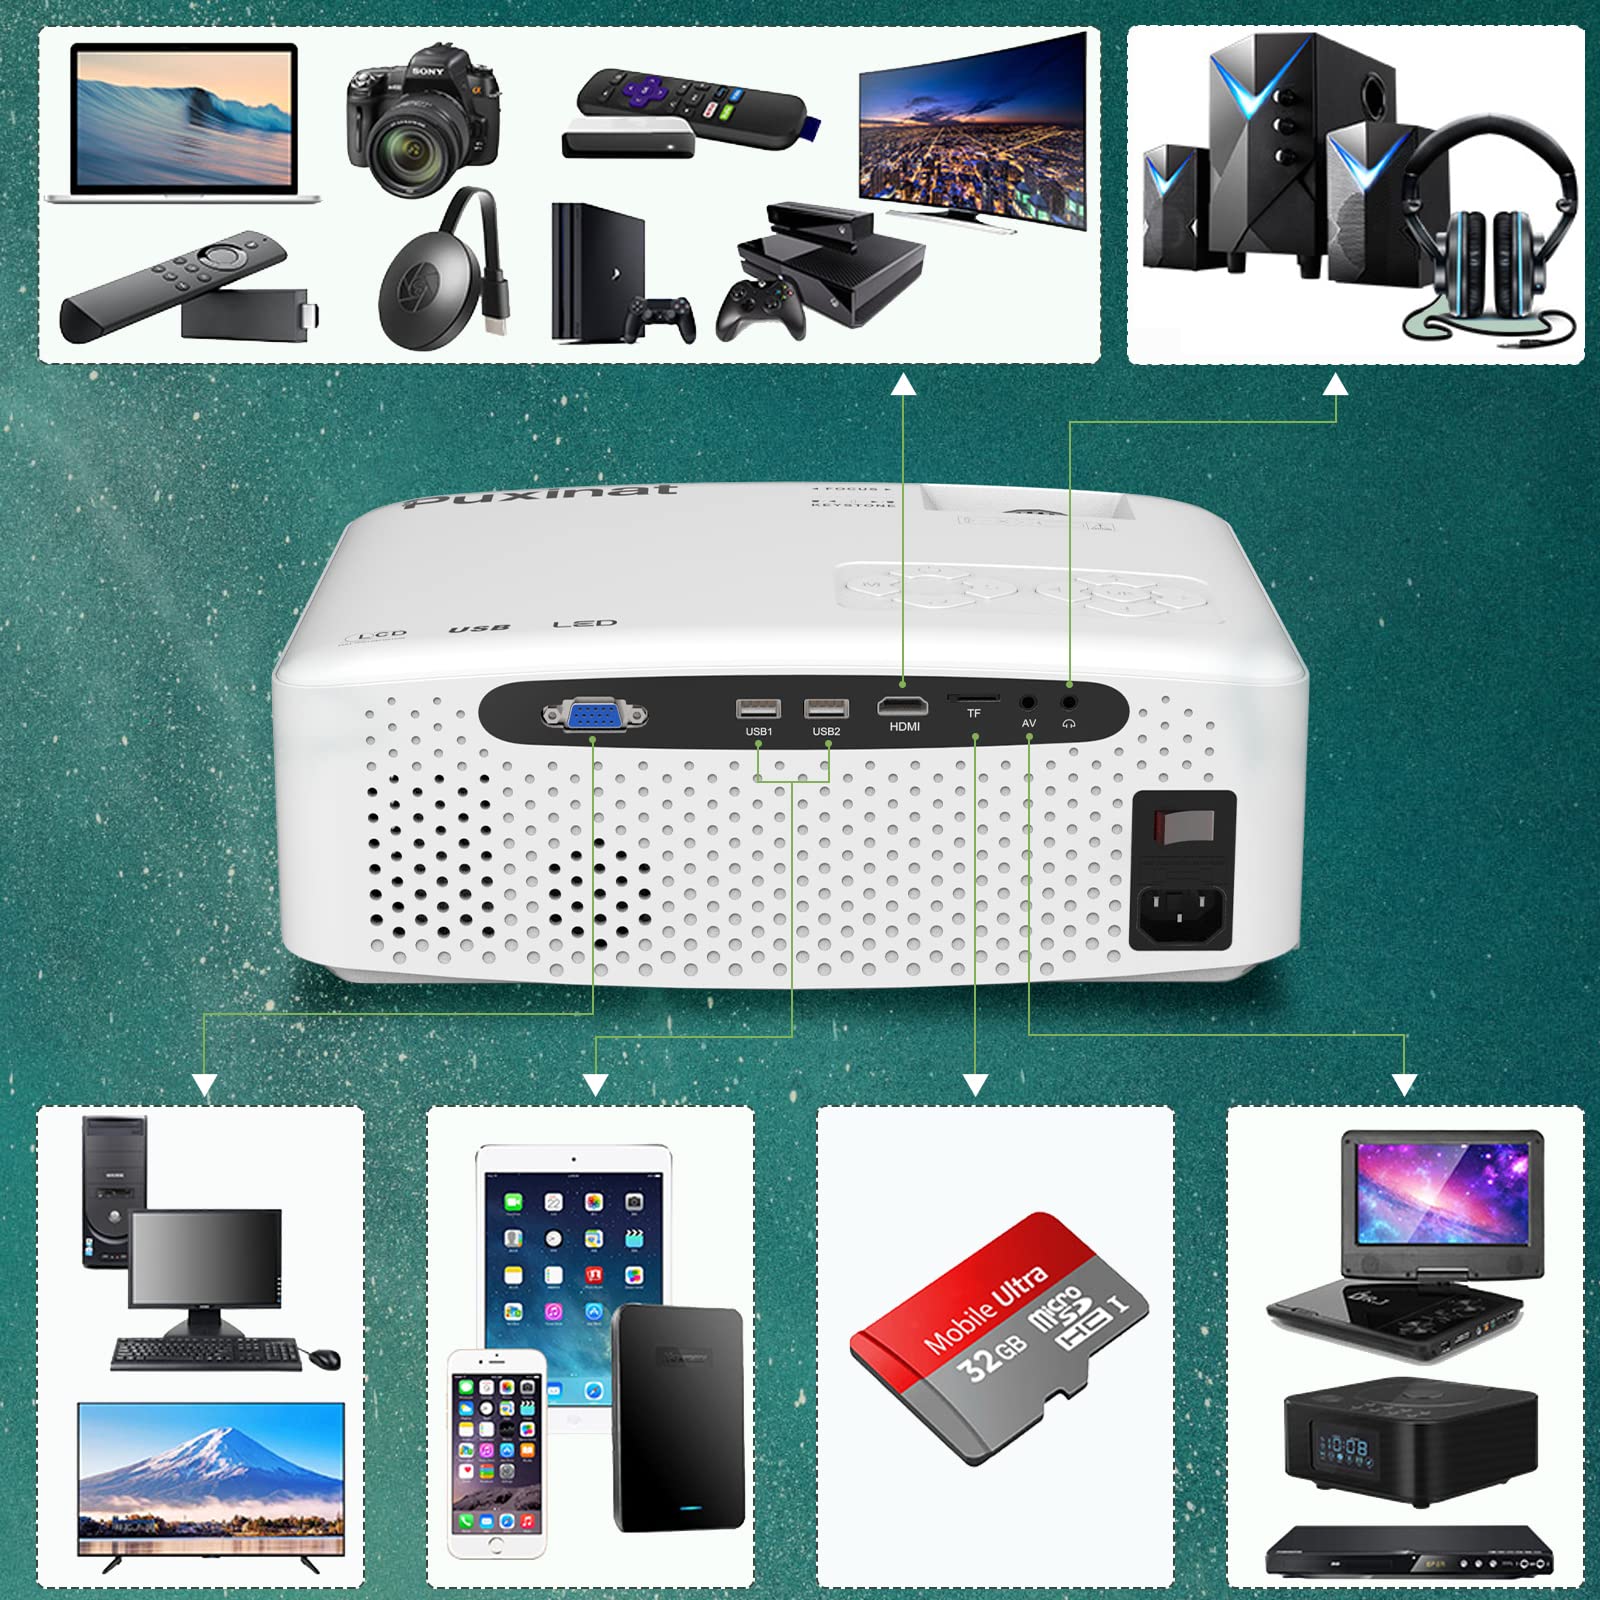 Native 1080P 19000 Lumens 5G WiFi Bluetooth Projector, 600ANSI Outdoor Movie Proyector Supports 4K, 5G/2.4G WiFi and Bluetooth 5.1, Compatible with HDMI, VGA, USB, Laptop, iOS & Android Phone